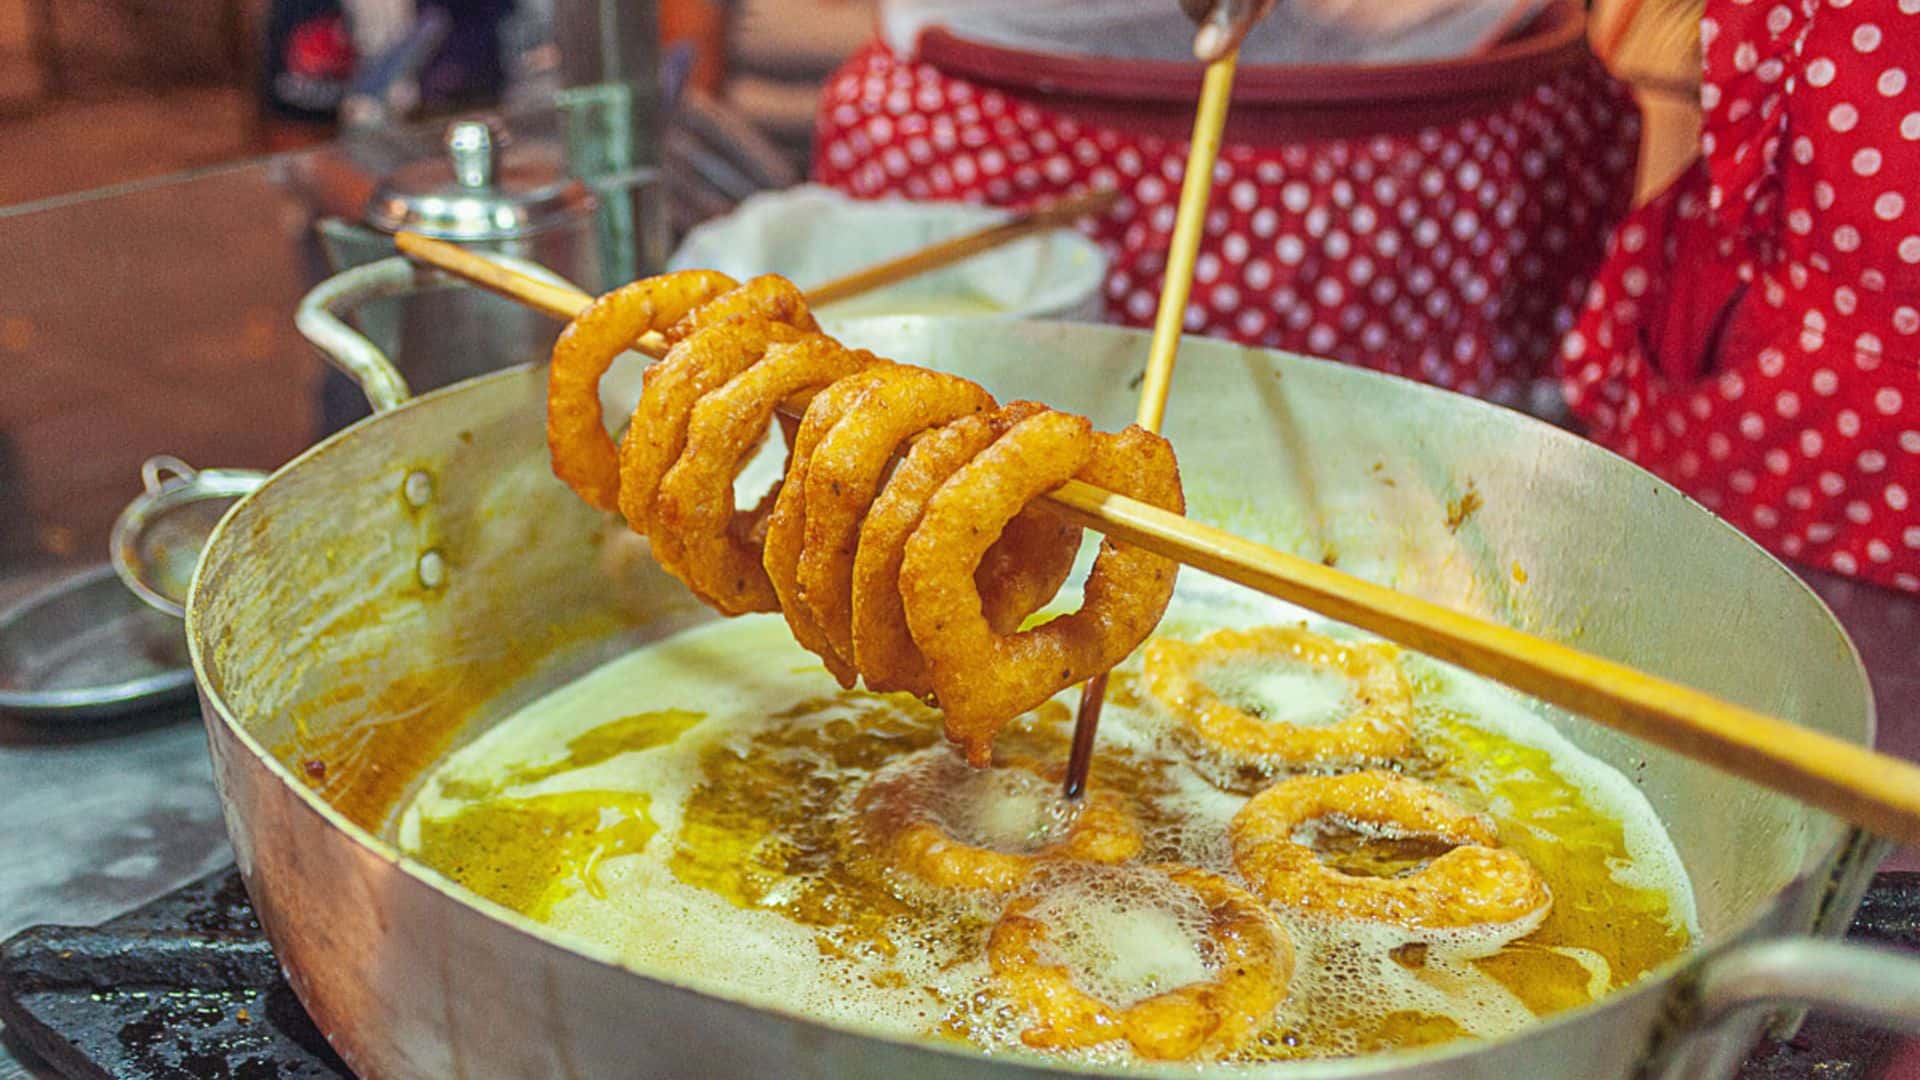 11Picarones are typical sweets prepared with wheat flour mixed with pumpkin | Responsible Travel Peru